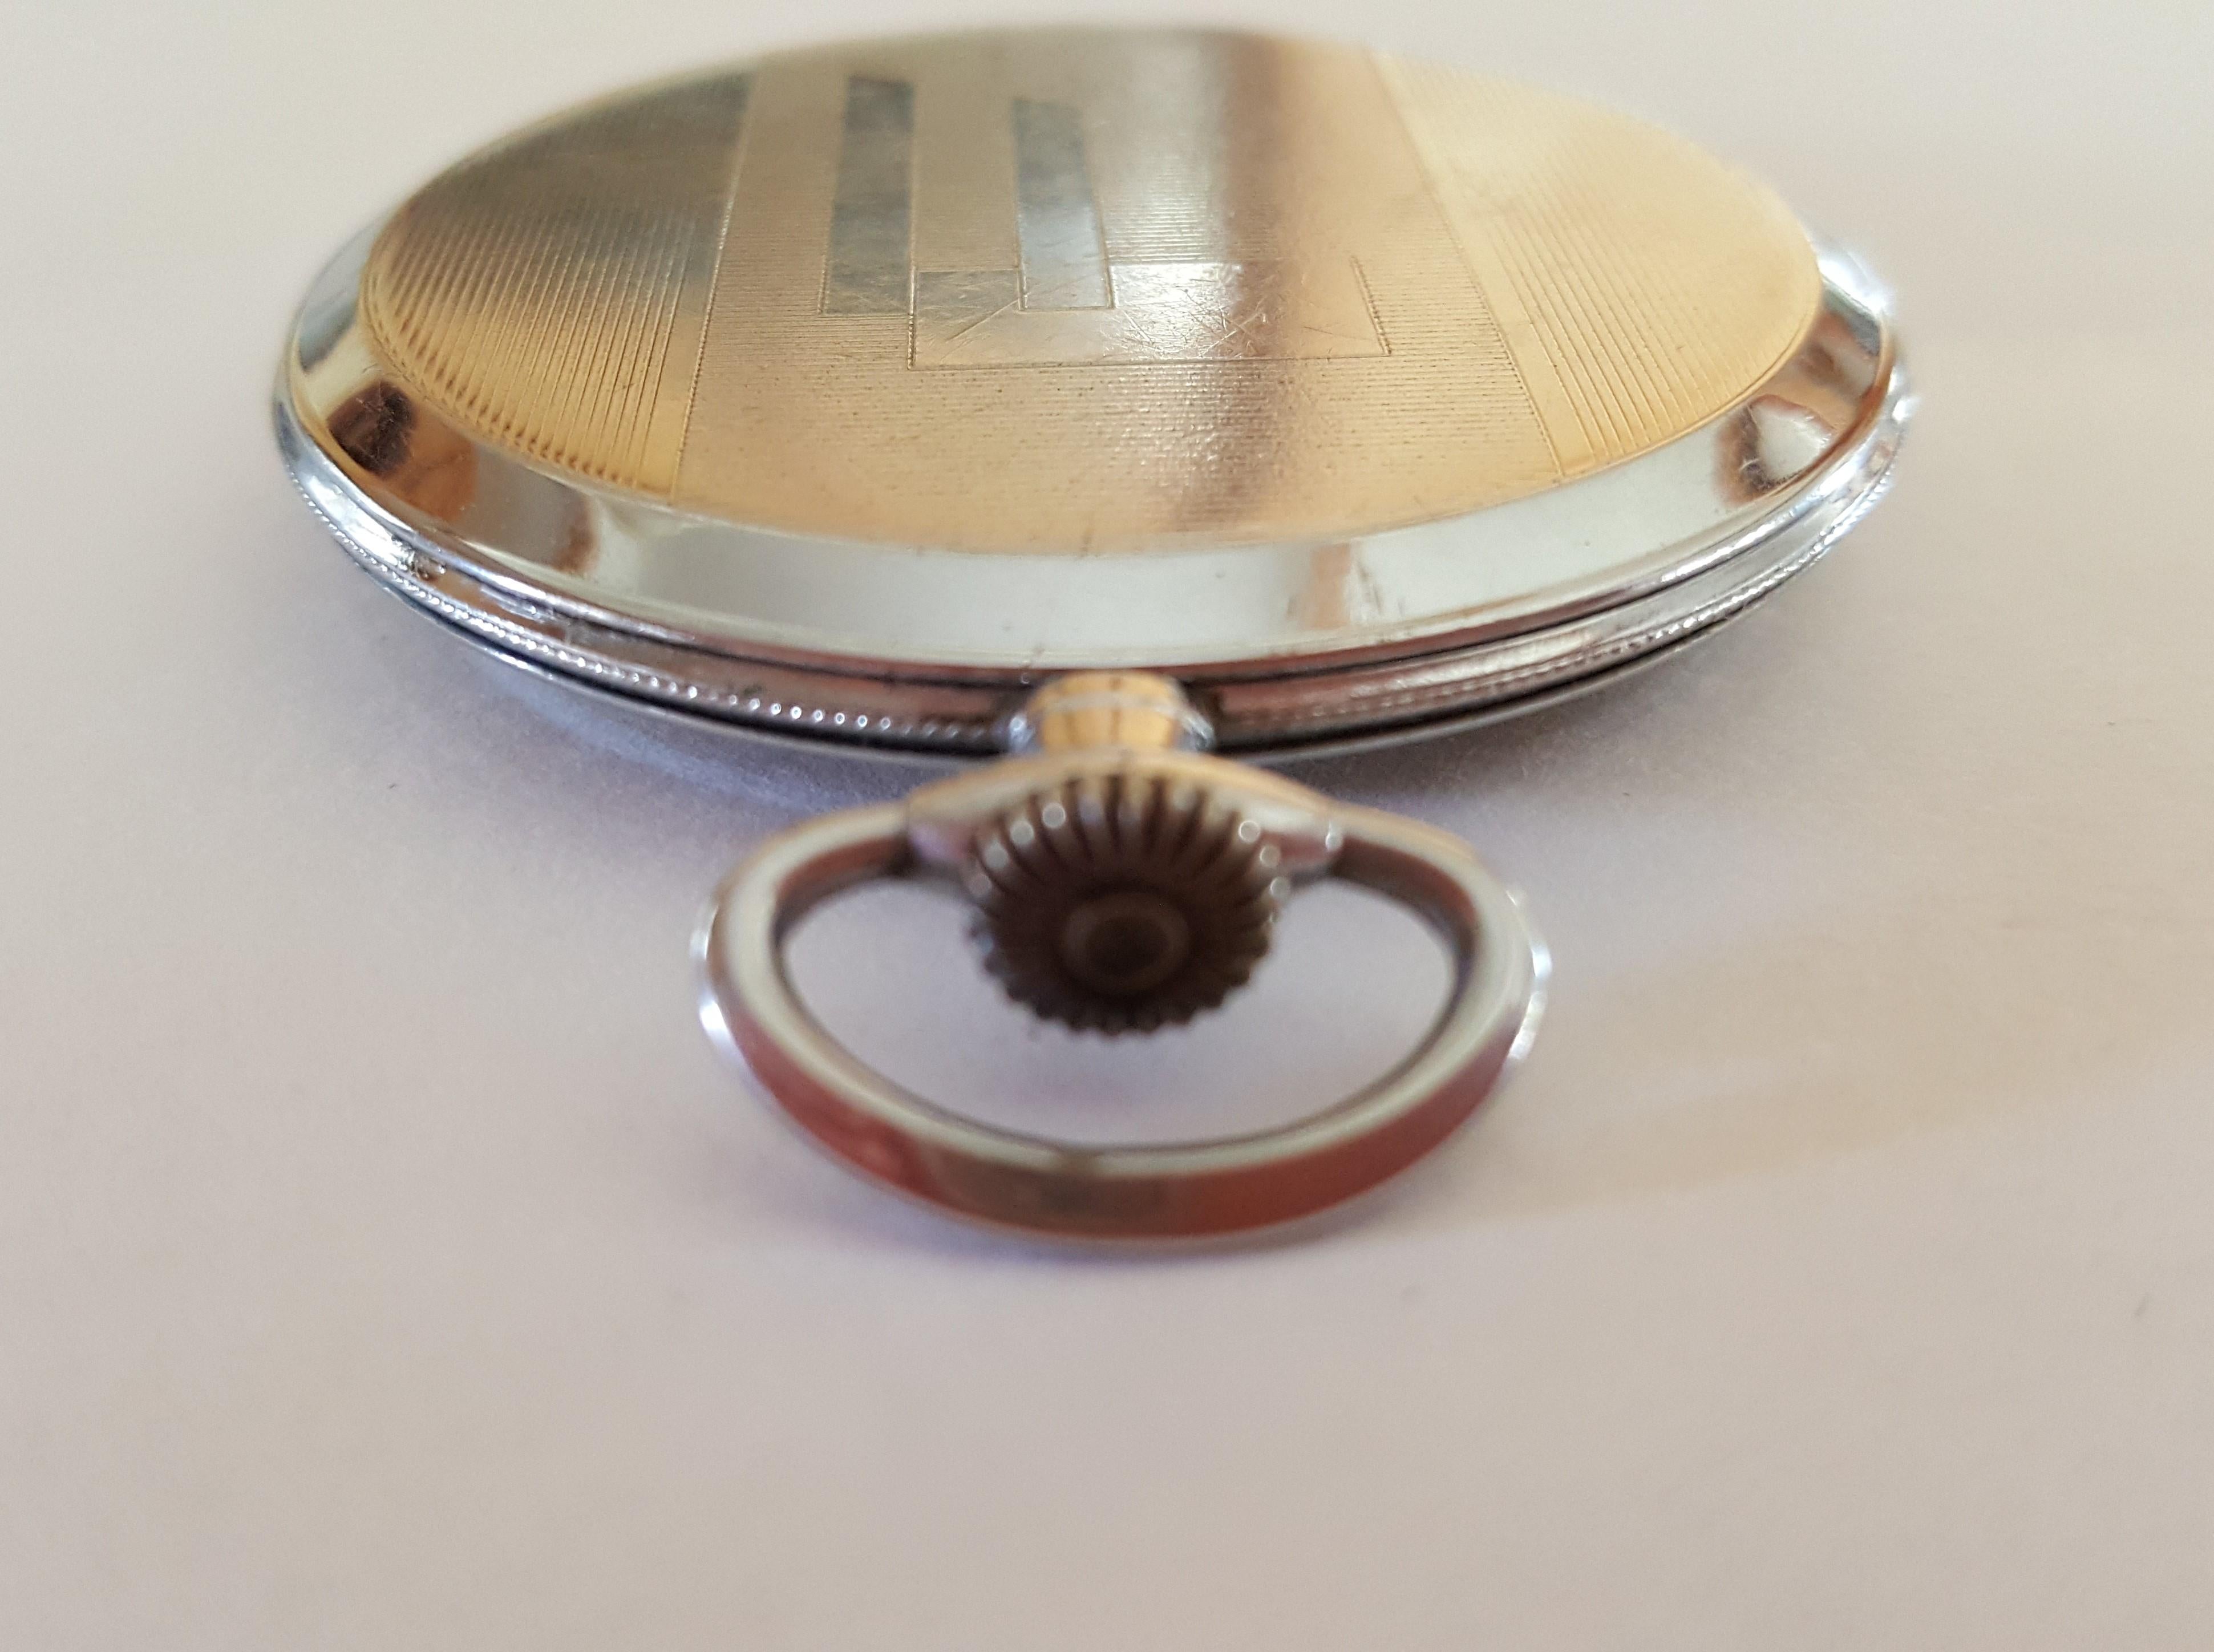 Lanco Pocket Watch 1950s, Chrome Case, Working, Slim Modern Design, 15 Jewel In Good Condition For Sale In Rancho Santa Fe, CA